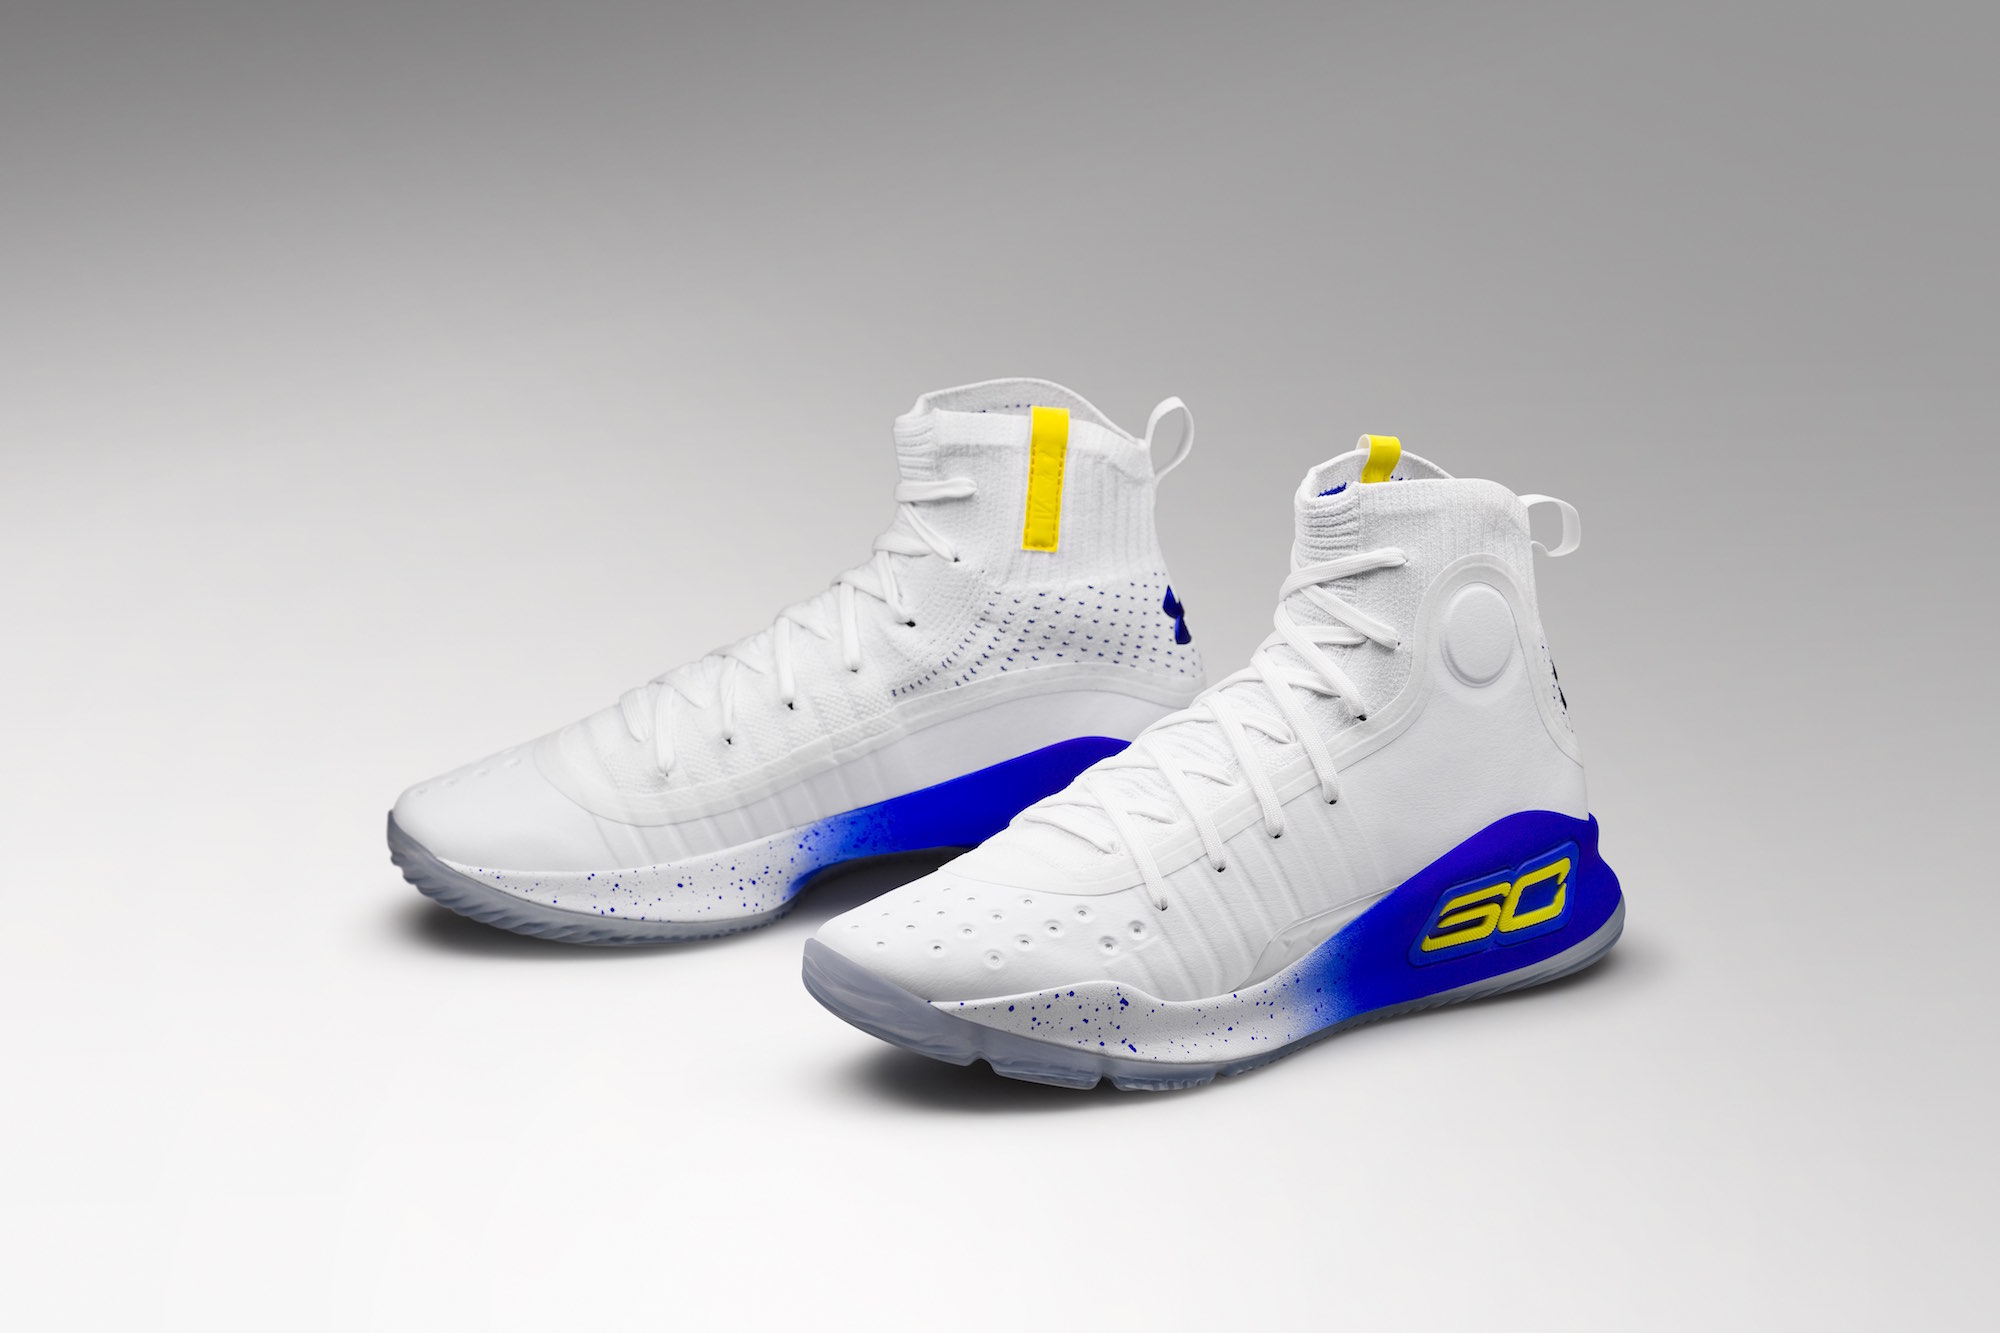 Under Armour Curry 4 More Dubs 4